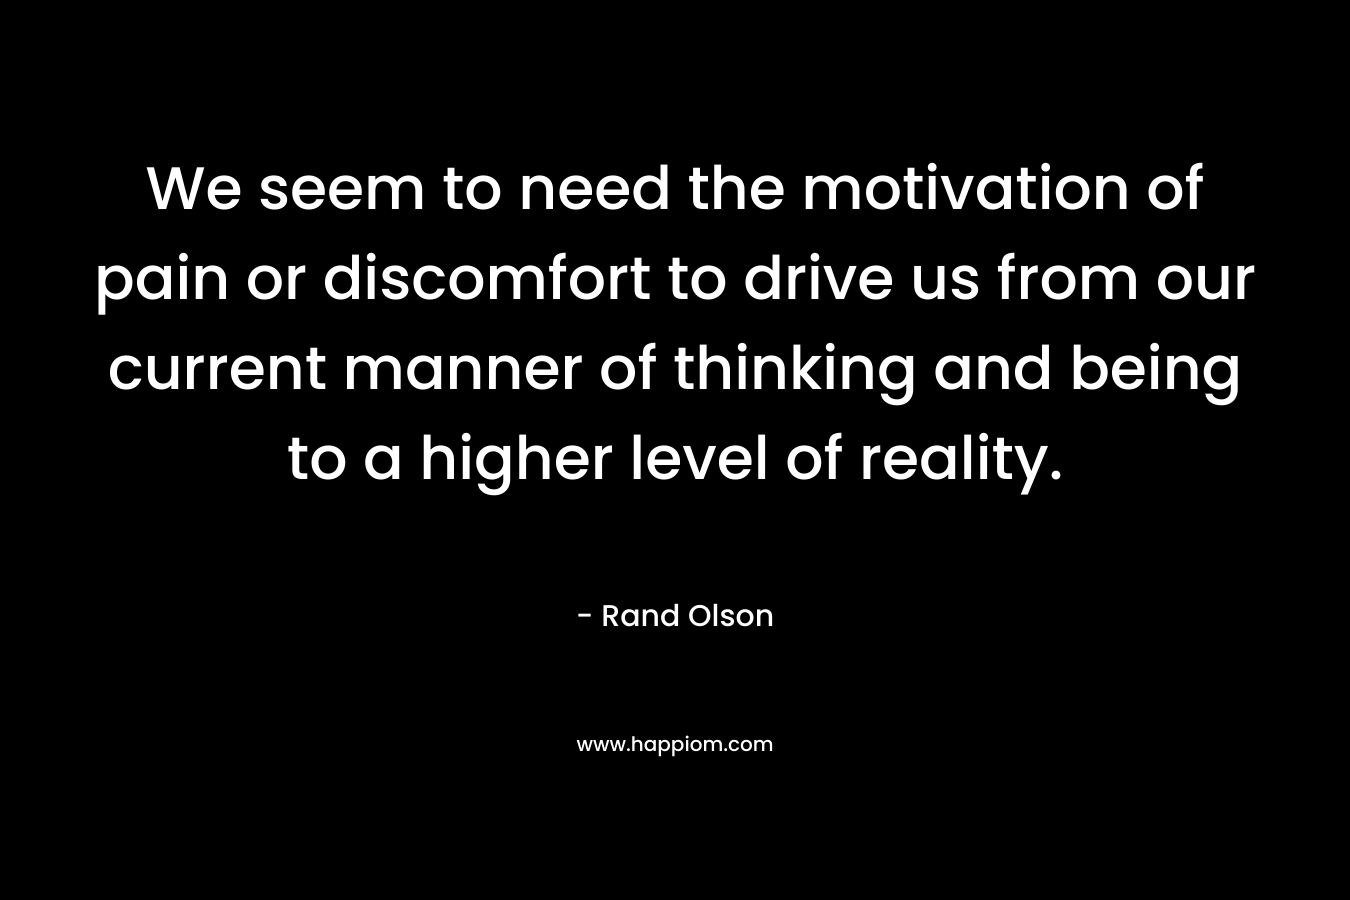 We seem to need the motivation of pain or discomfort to drive us from our current manner of thinking and being to a higher level of reality.